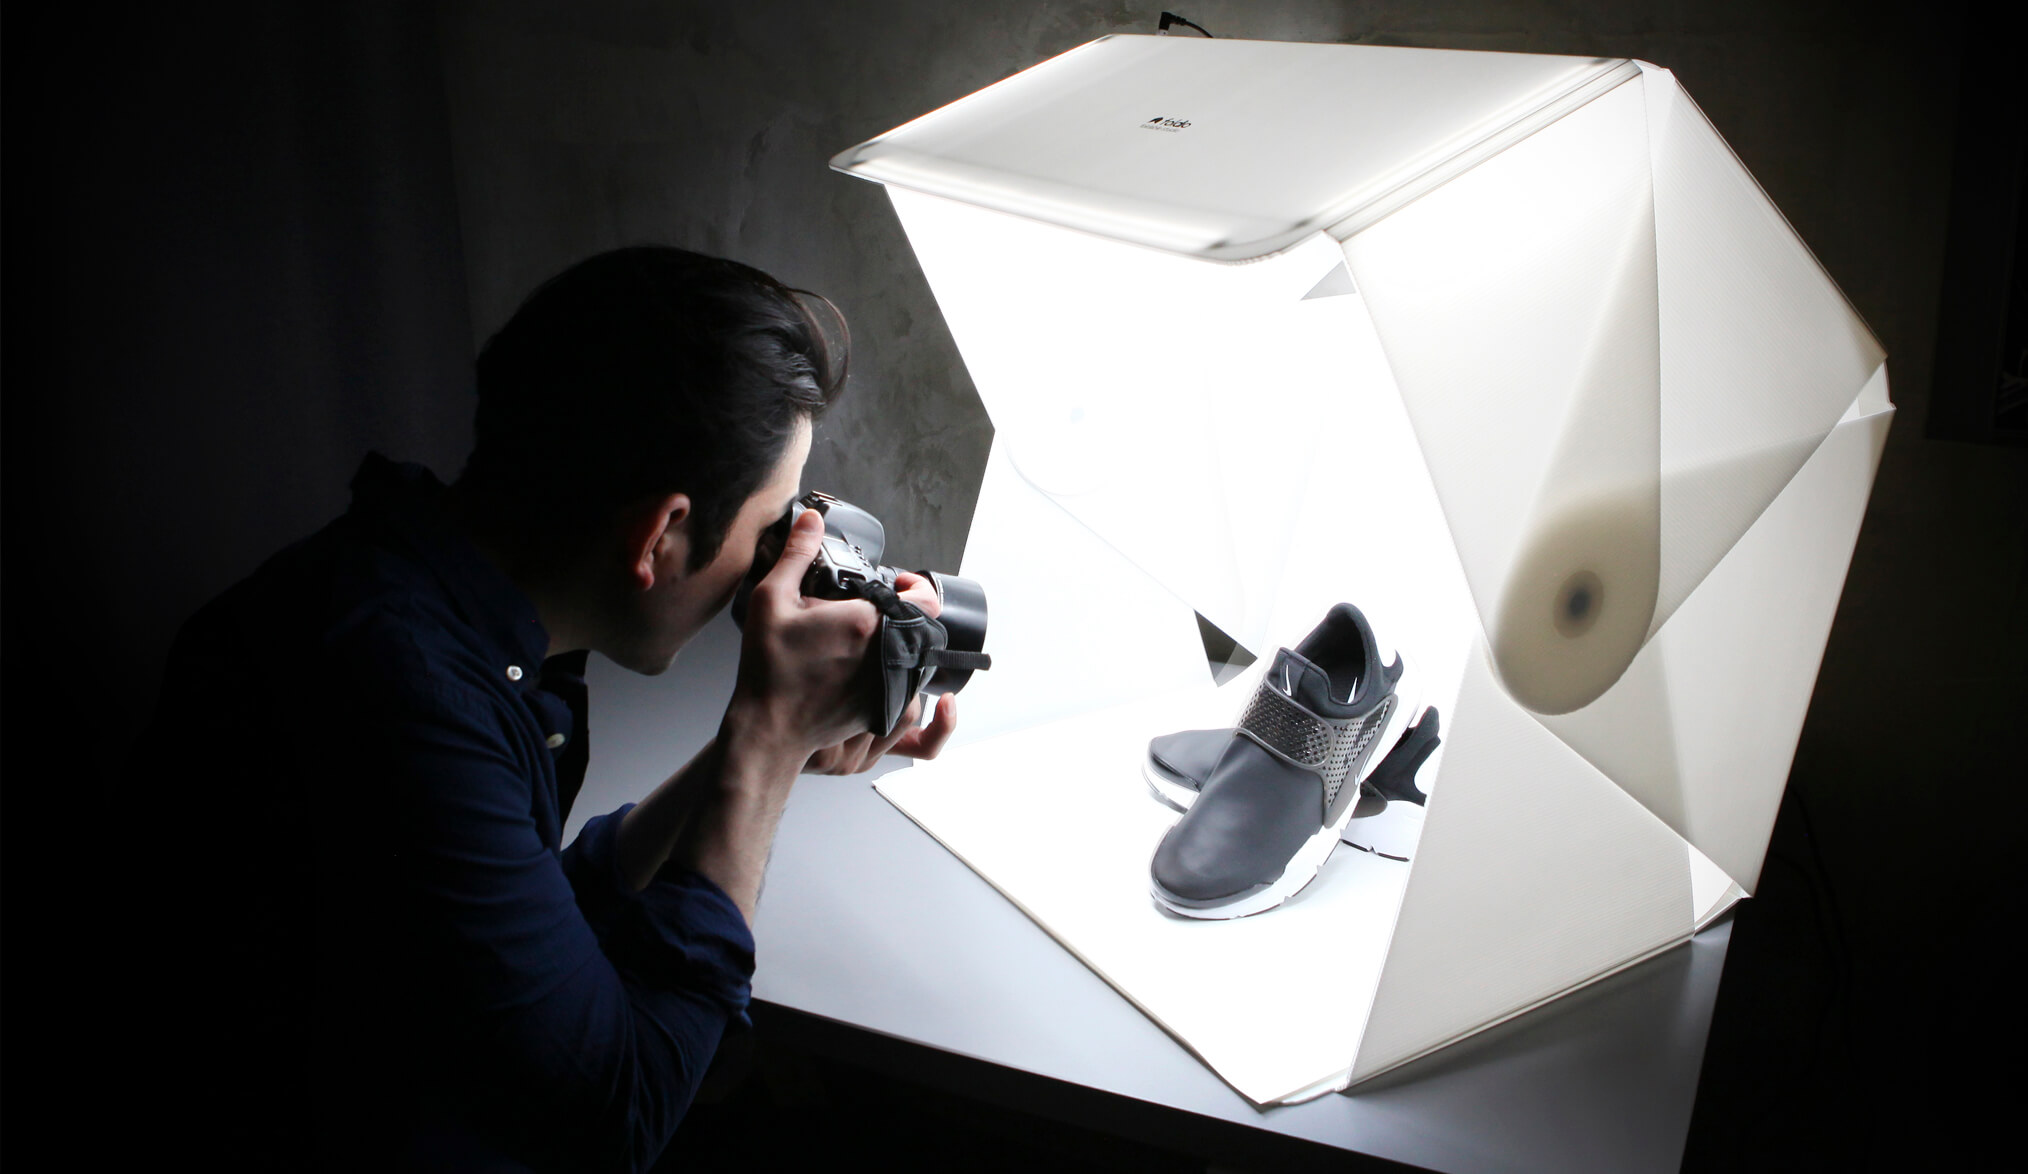 15 Stellar Product Photography Ideas that will Help You Sell More